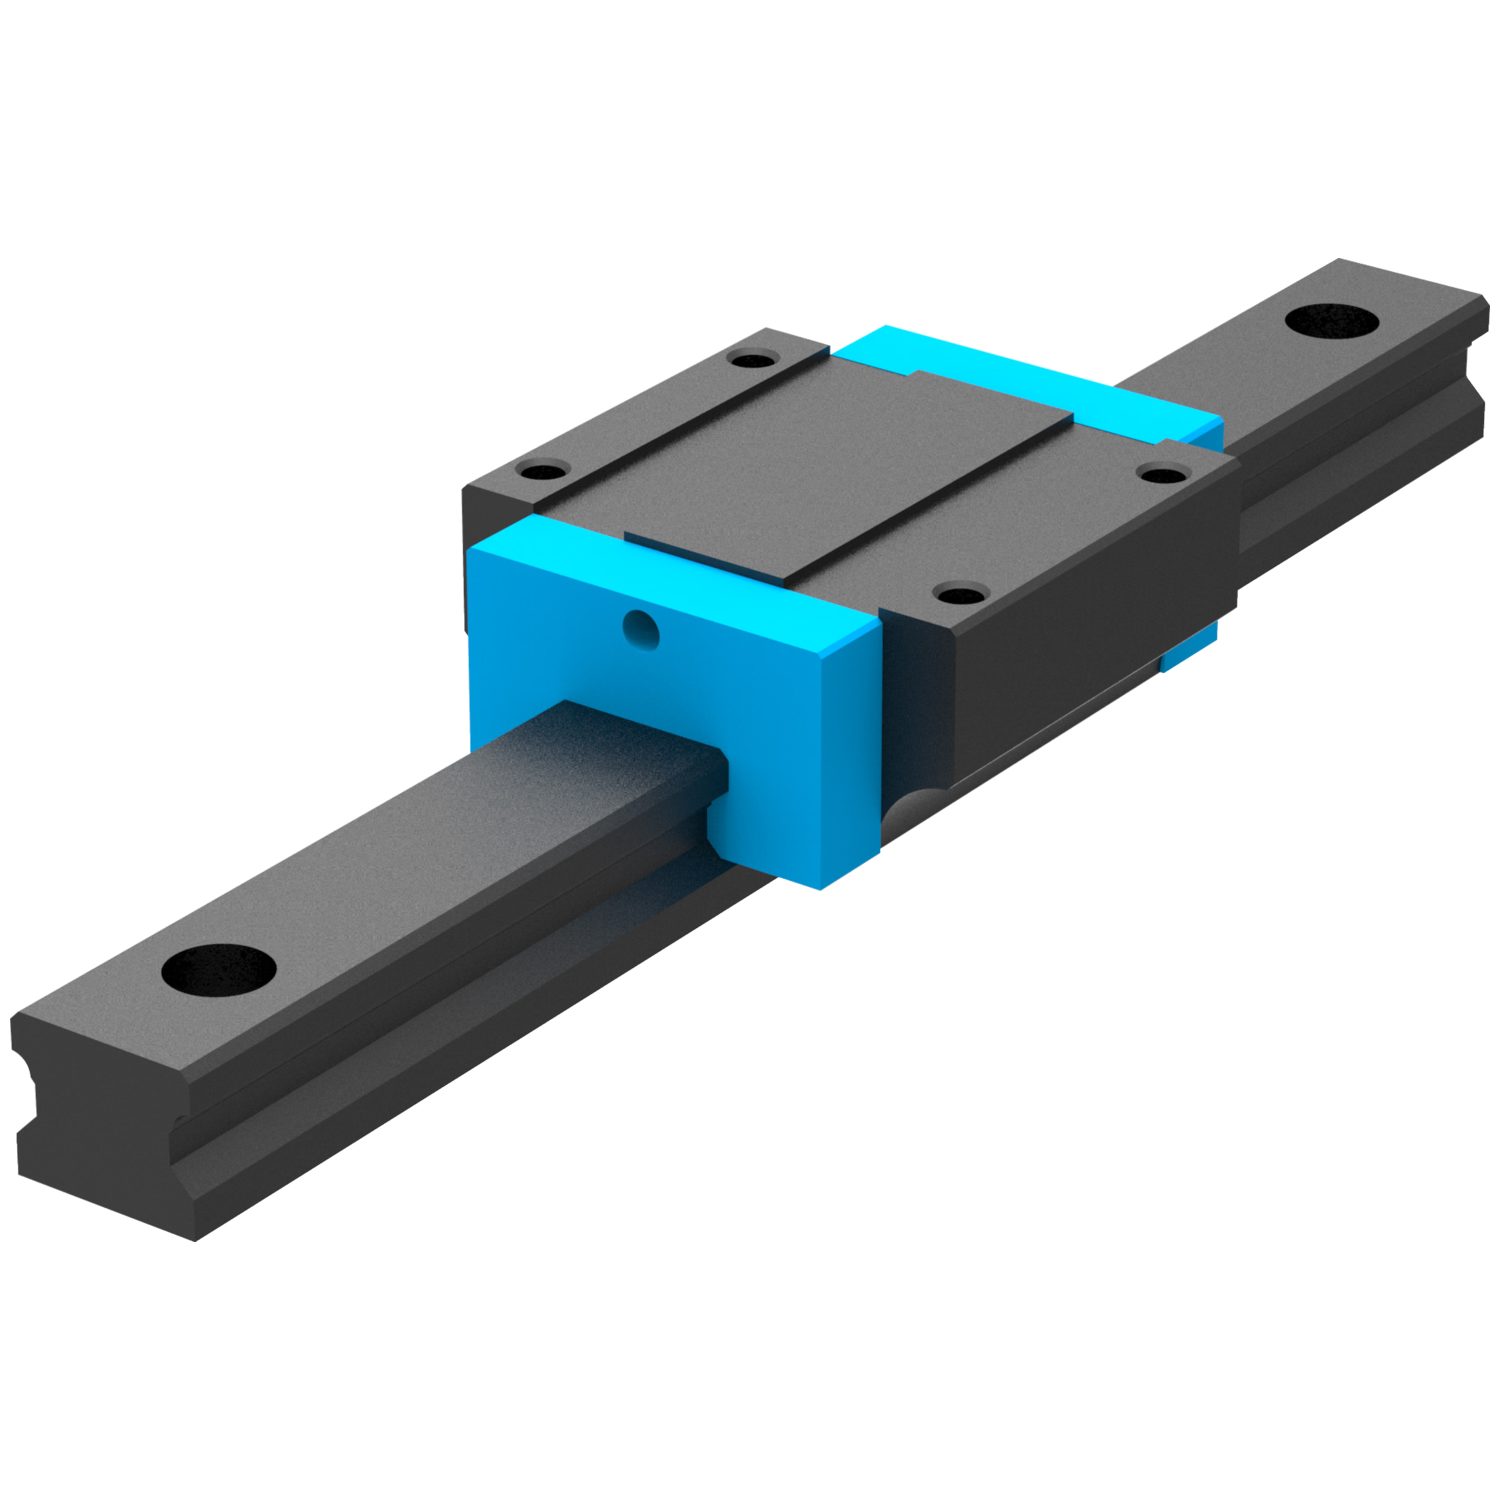 Linear Guideways Blackened front fixing linear guide, comes in 15mm, 20mm & 25mm lengths. Rear-fixing versions (L1016.BR) and matching blackened carriages (L1016.F-BC and L1016.U-BC) also available.